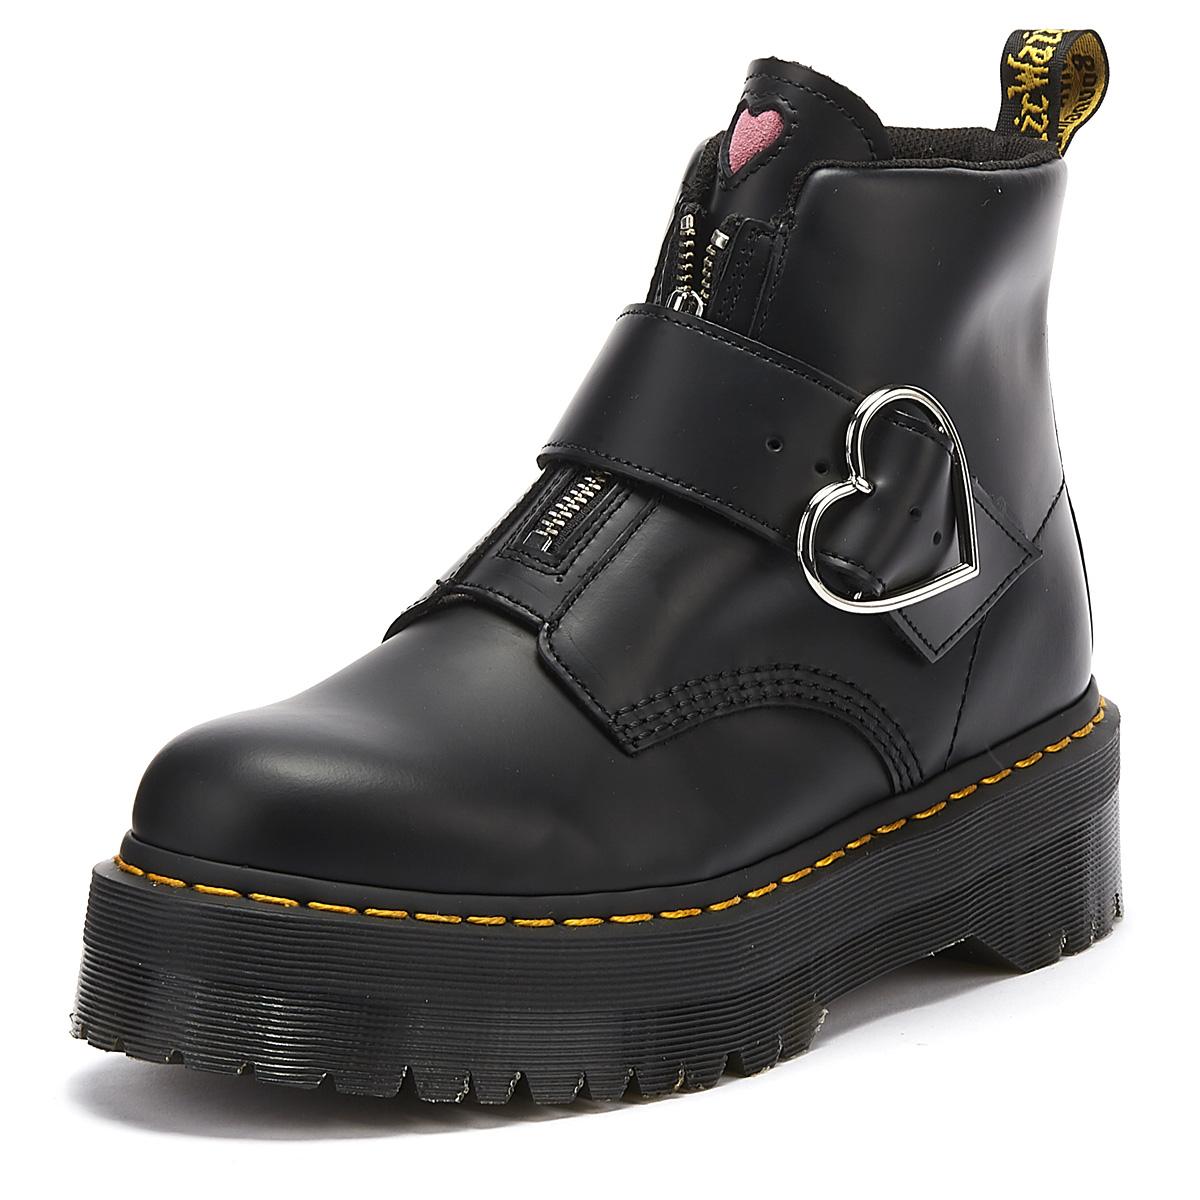 Dr. Martens Leather Dr. Martens X Lazy Oaf Buckle Womens Black Boots - Lyst